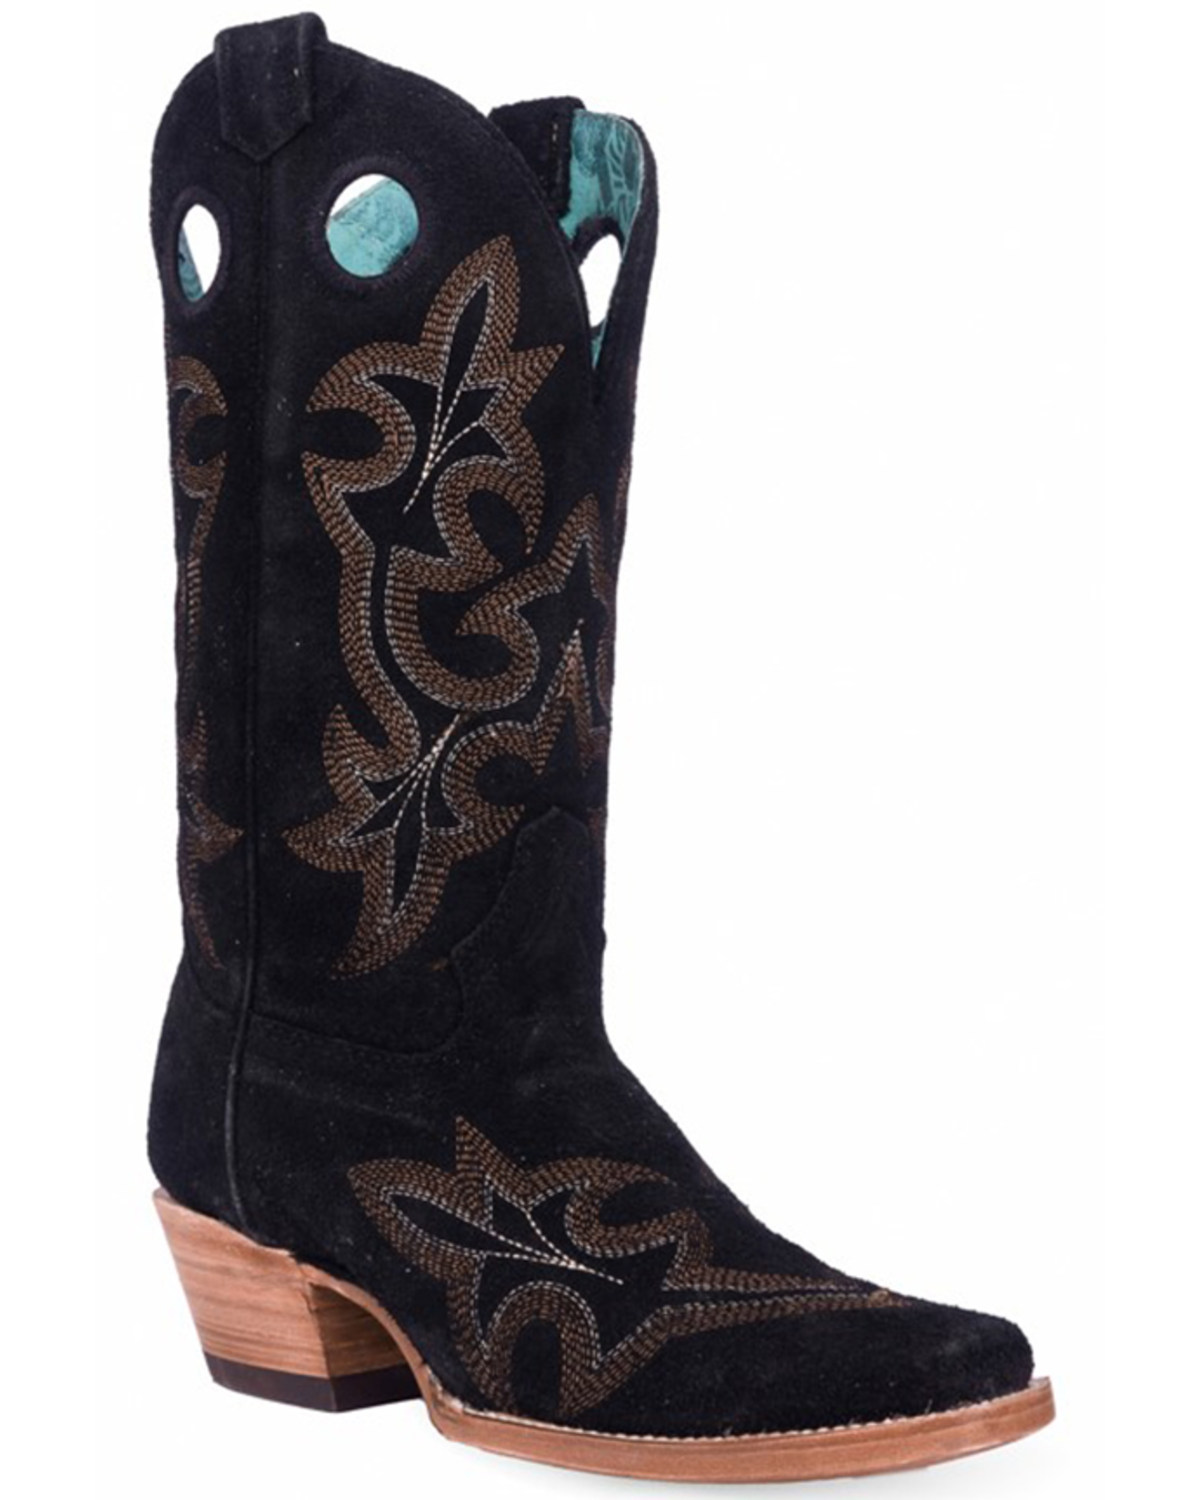 Corral Women's Suede Western Boots - Square Toe